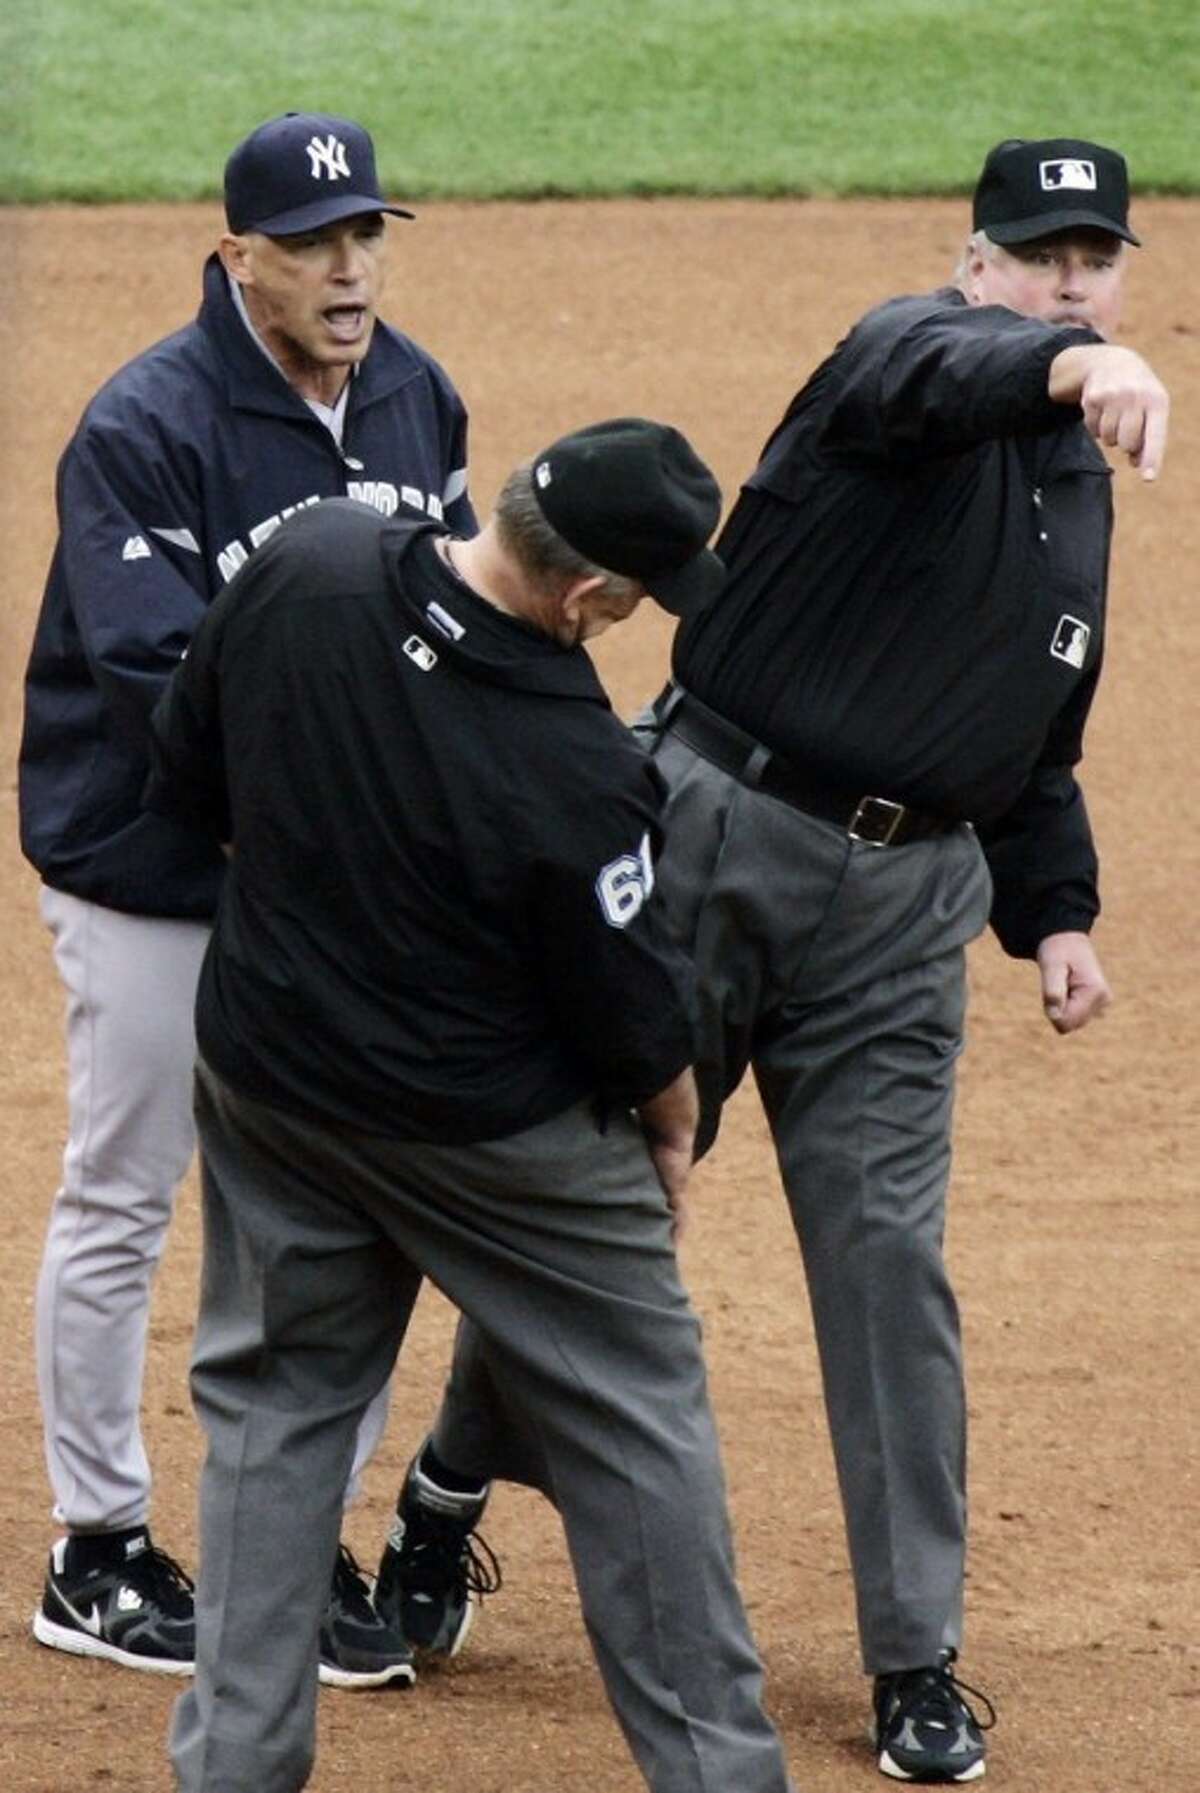 New York Yankees manager Joe Girardi, left, is tossed by third base umpire Tim Welke, right, after arguing about a double by Detroit Tigers' Andy Dirks that hit down the left field line in the fifth inning of a baseball game, Thursday, Aug. 9, 2012, in Detroit. Welke first signaled a foul ball and then signaled a fair ball on the play. Second base umpire Bob Davidson, front, looks on. (AP Photo/Duane Burleson)